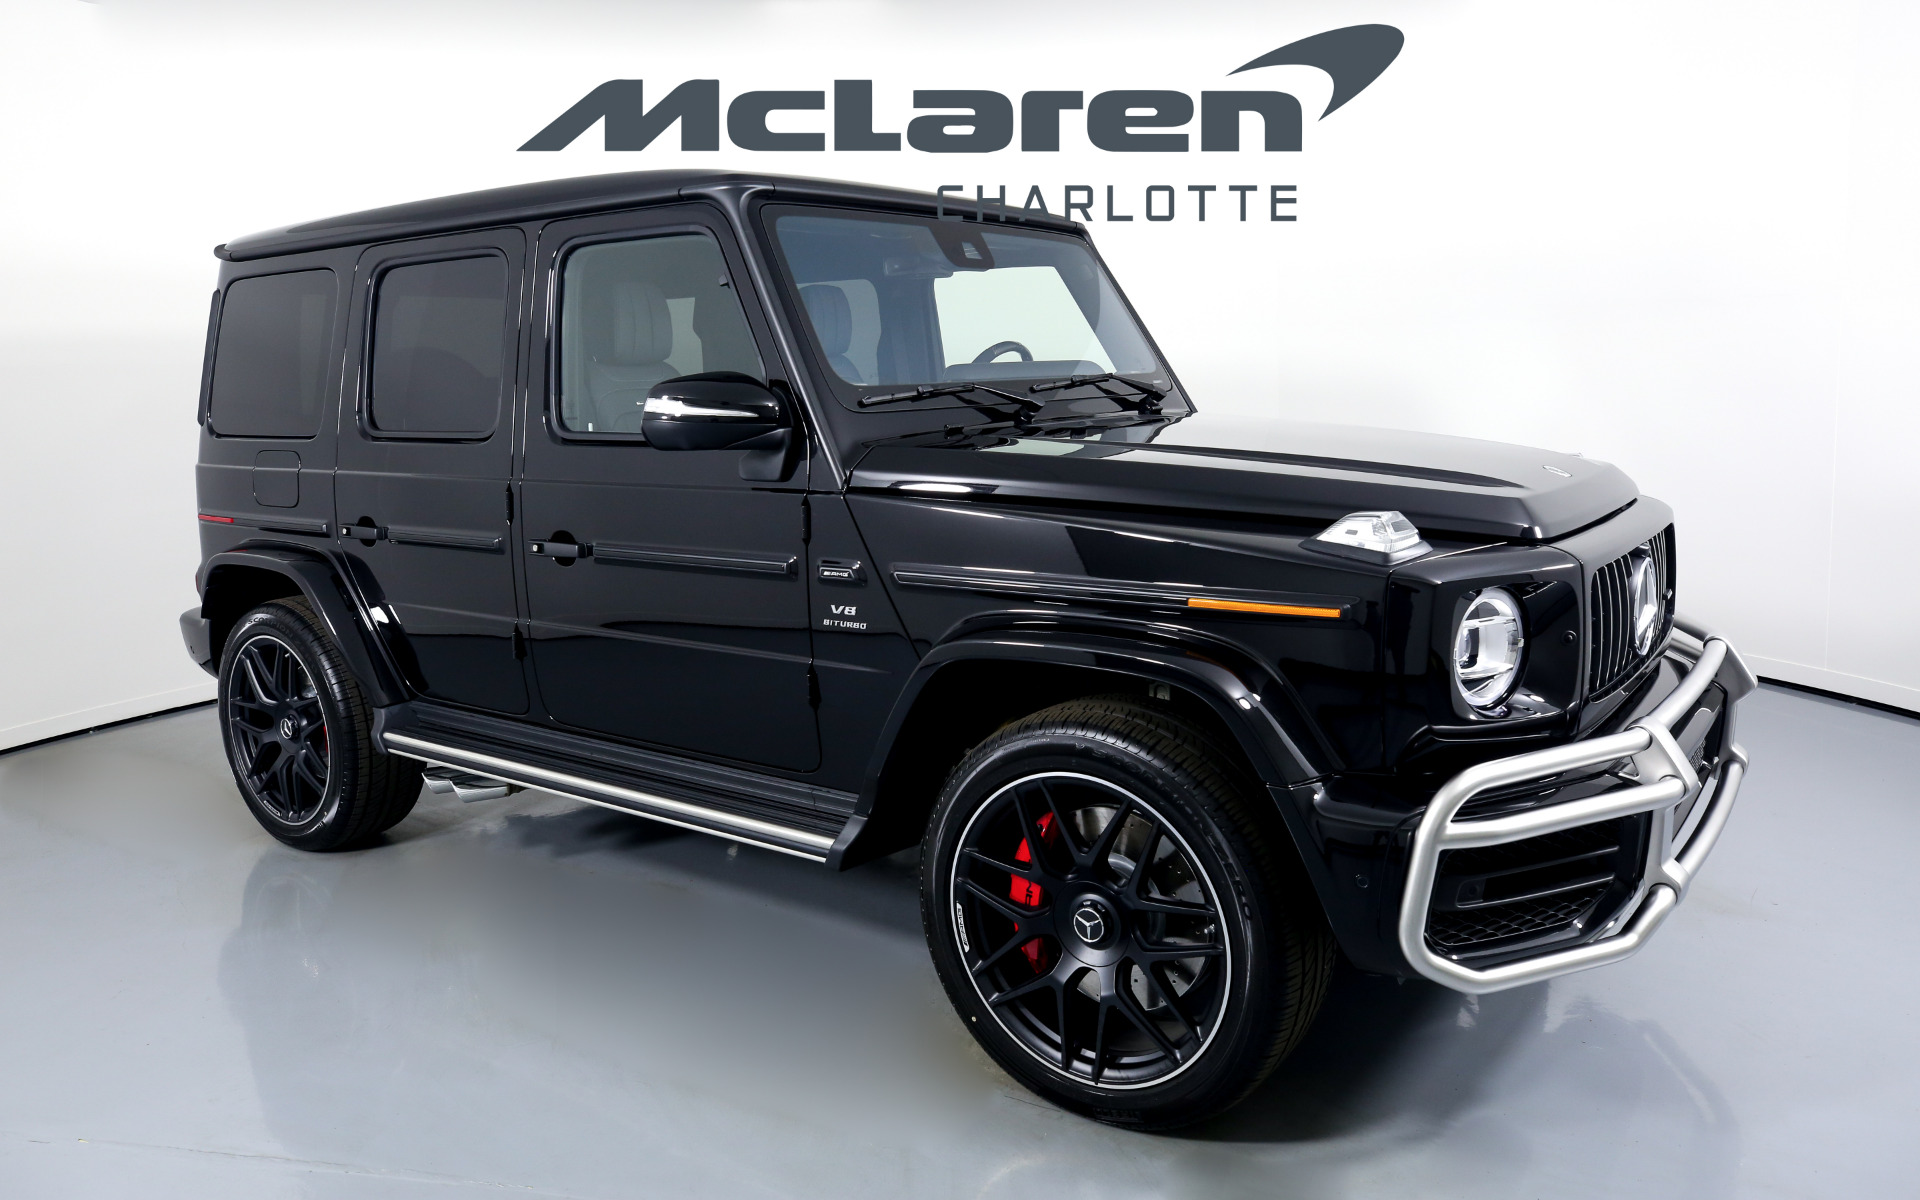 Used 21 Mercedes Benz G Class Amg G 63 For Sale 299 996 Mclaren Charlotte Stock